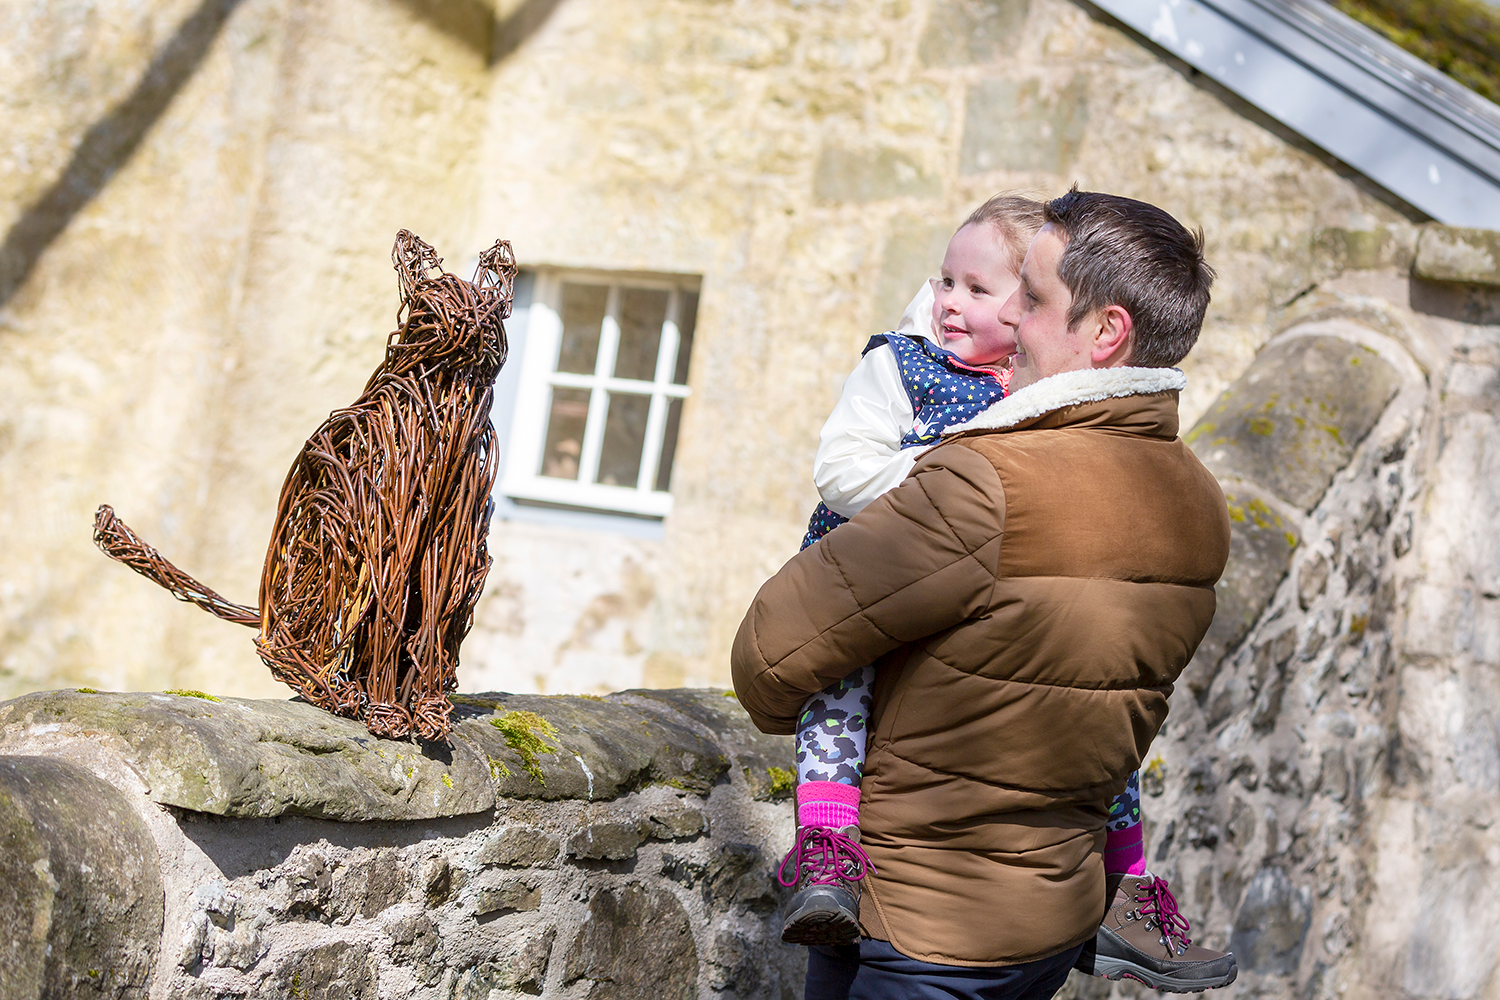 Visitors look at a willow sculpture of a cat sitting on a wall